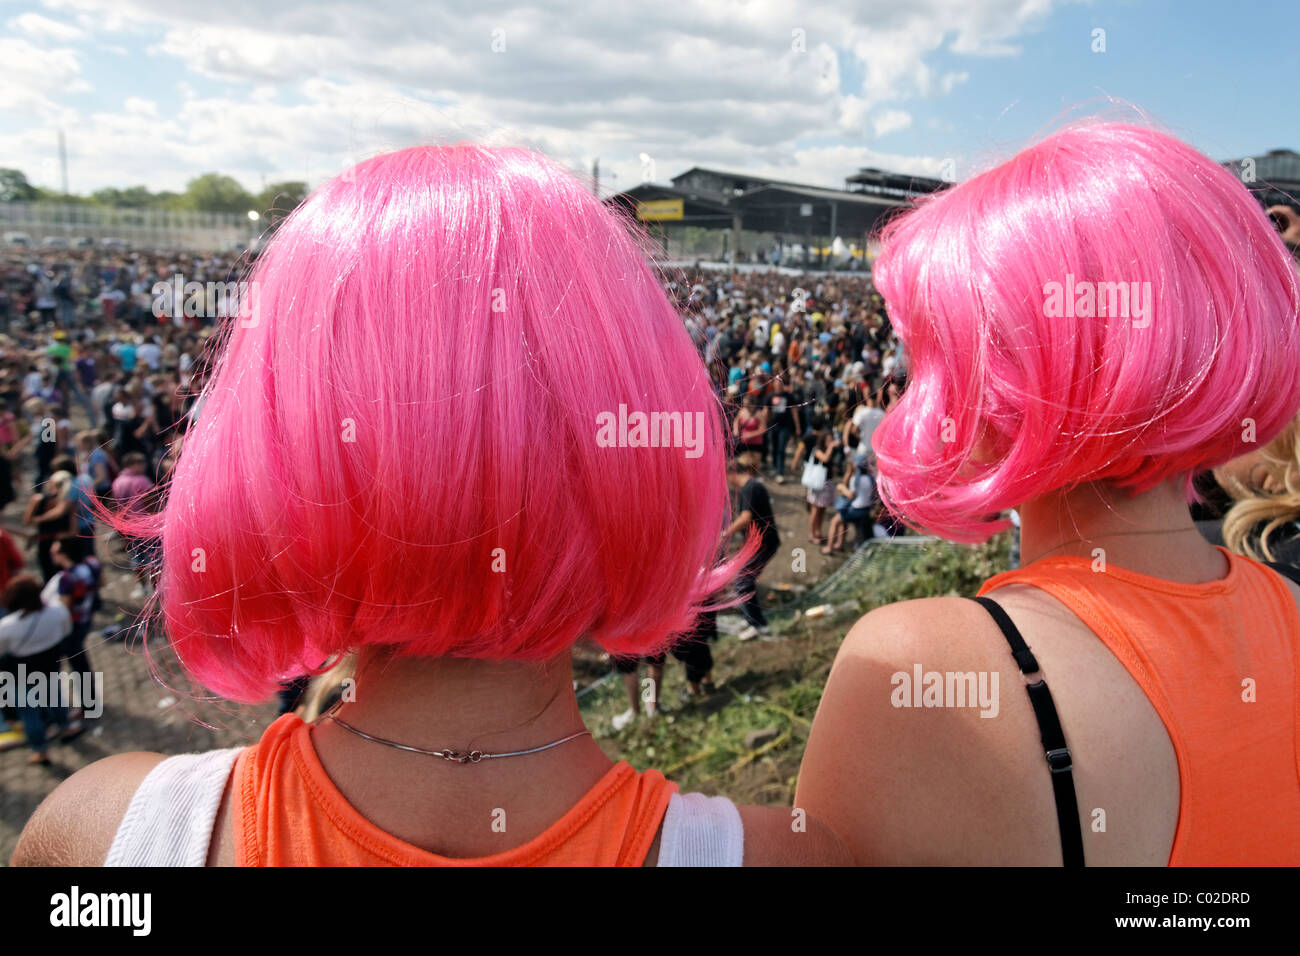 Two young female ravers wearing whacky wigs watching the crowds, Loveparade 2010, Duisburg, North Rhine-Westfalia Stock Photo